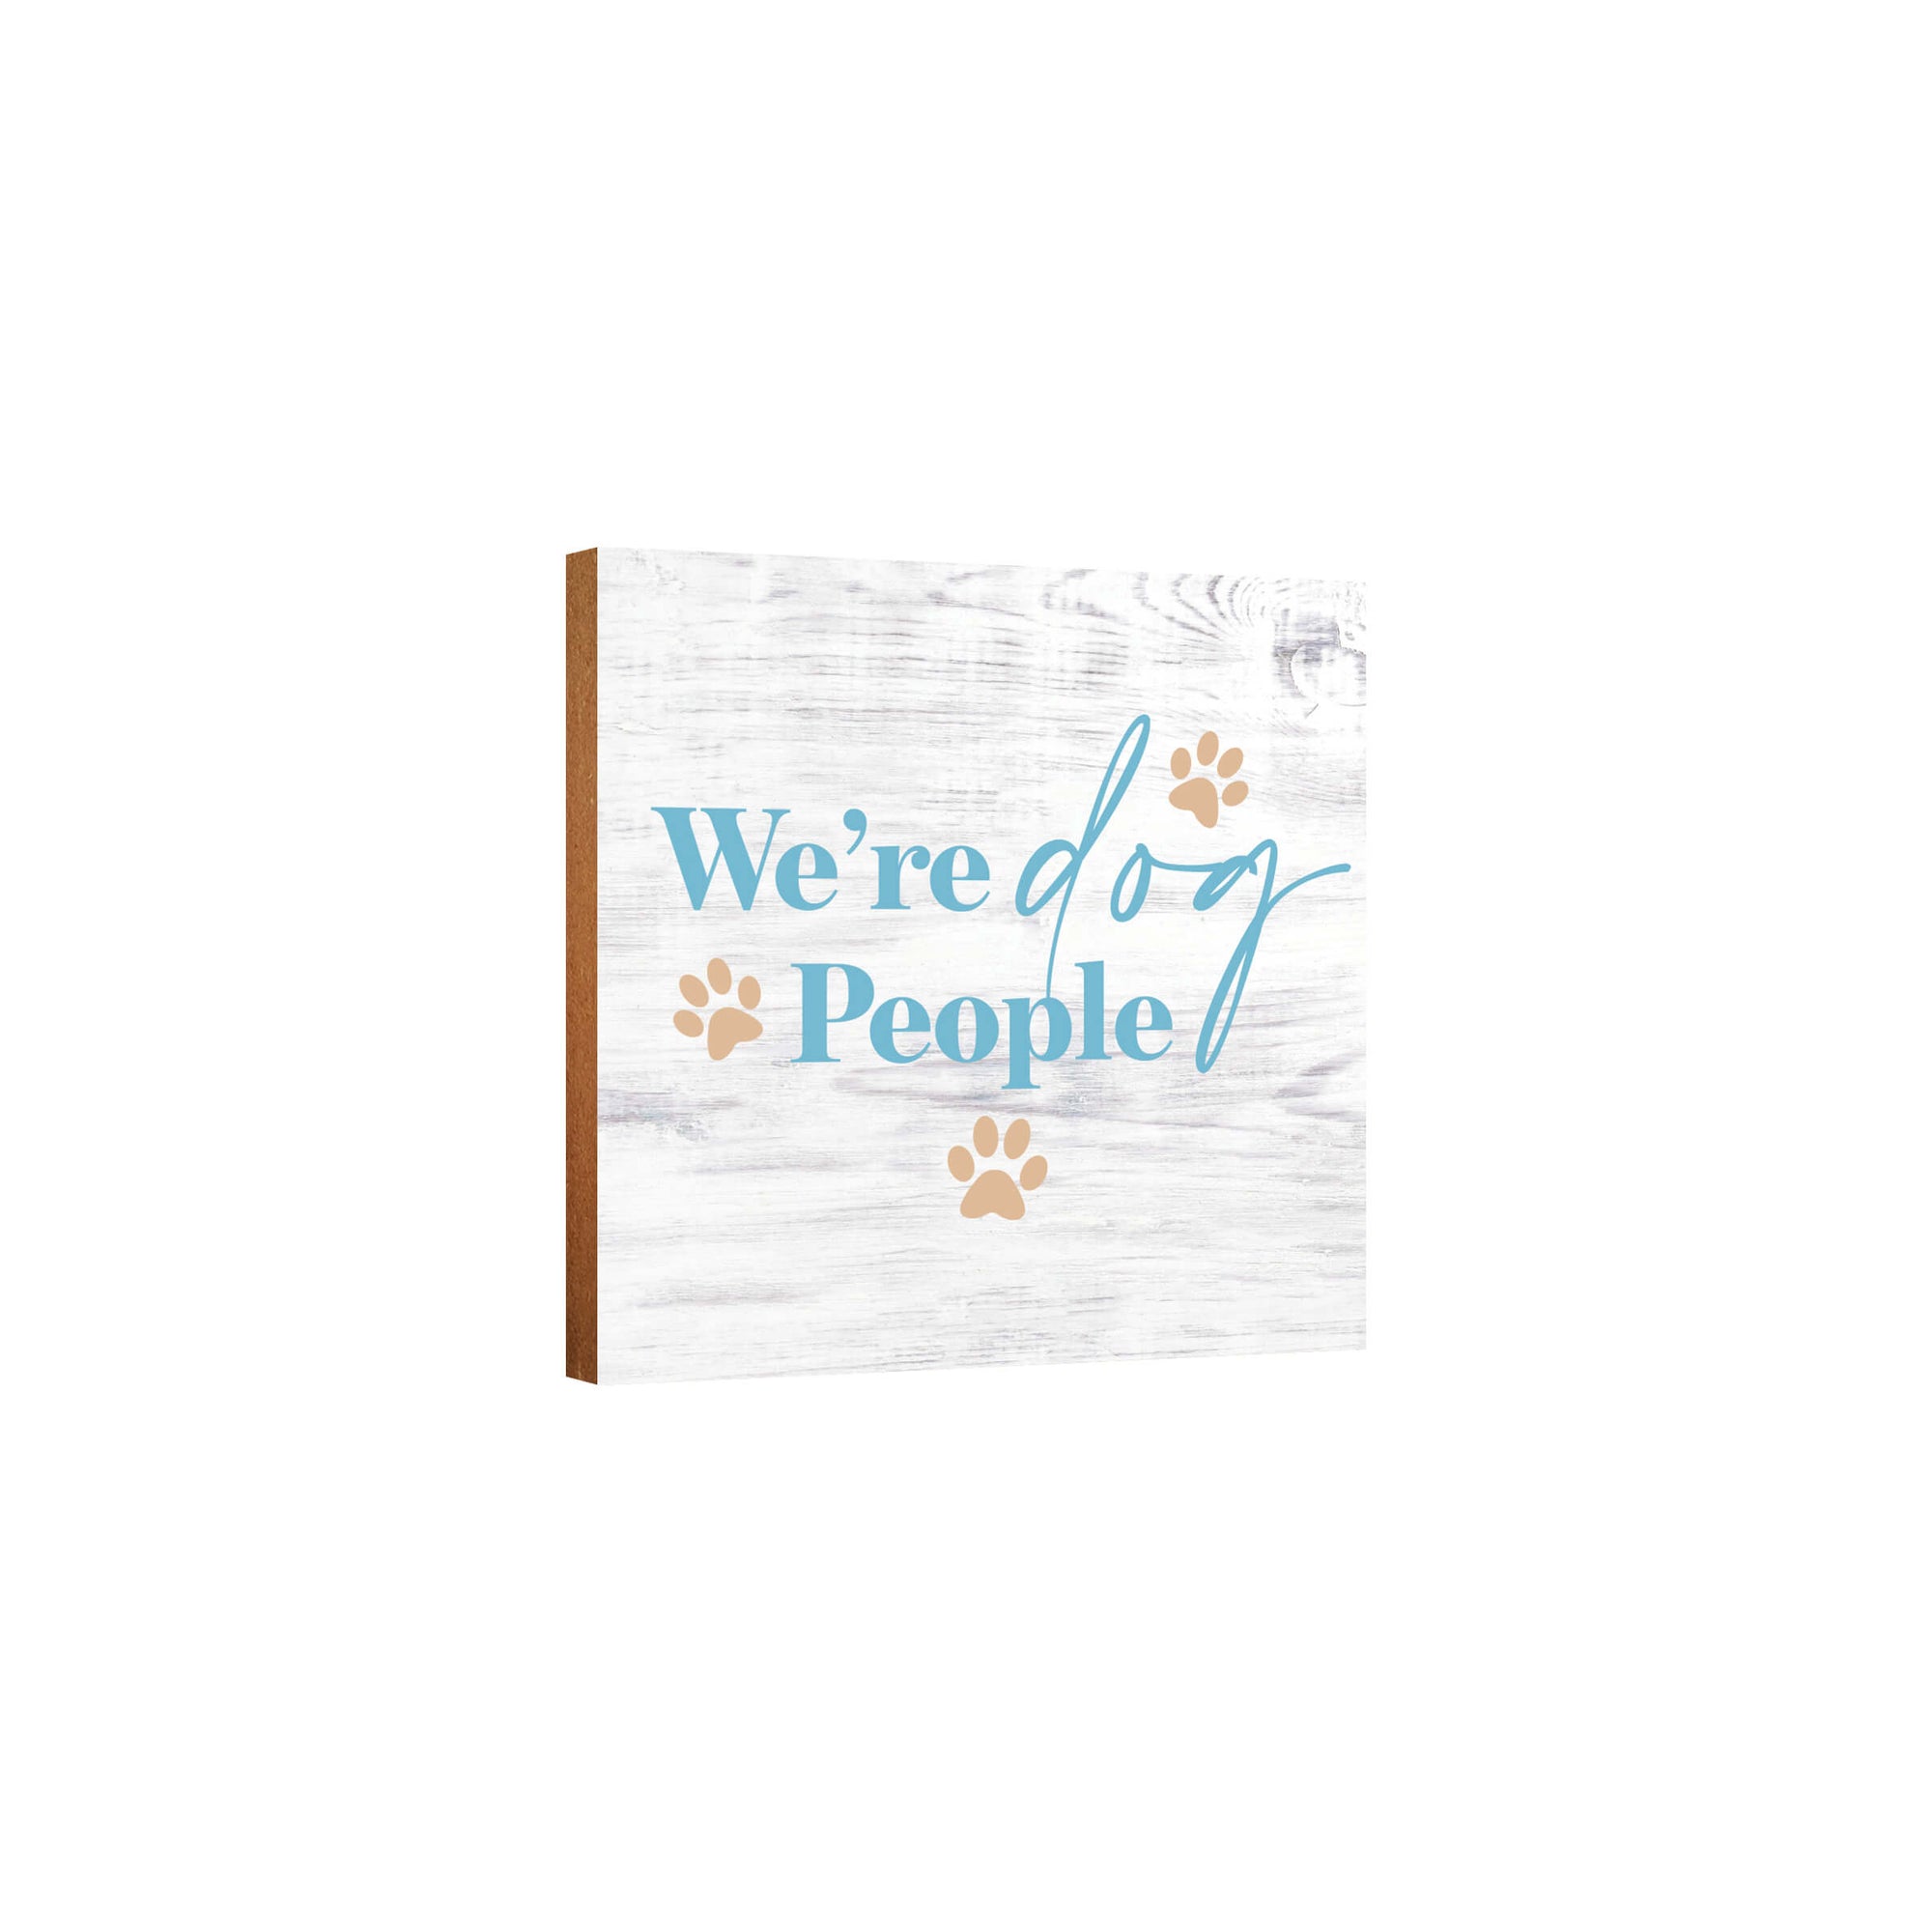 Wooden Shelf Decor and Tabletop Signs with Pet Verses - We're Dog People